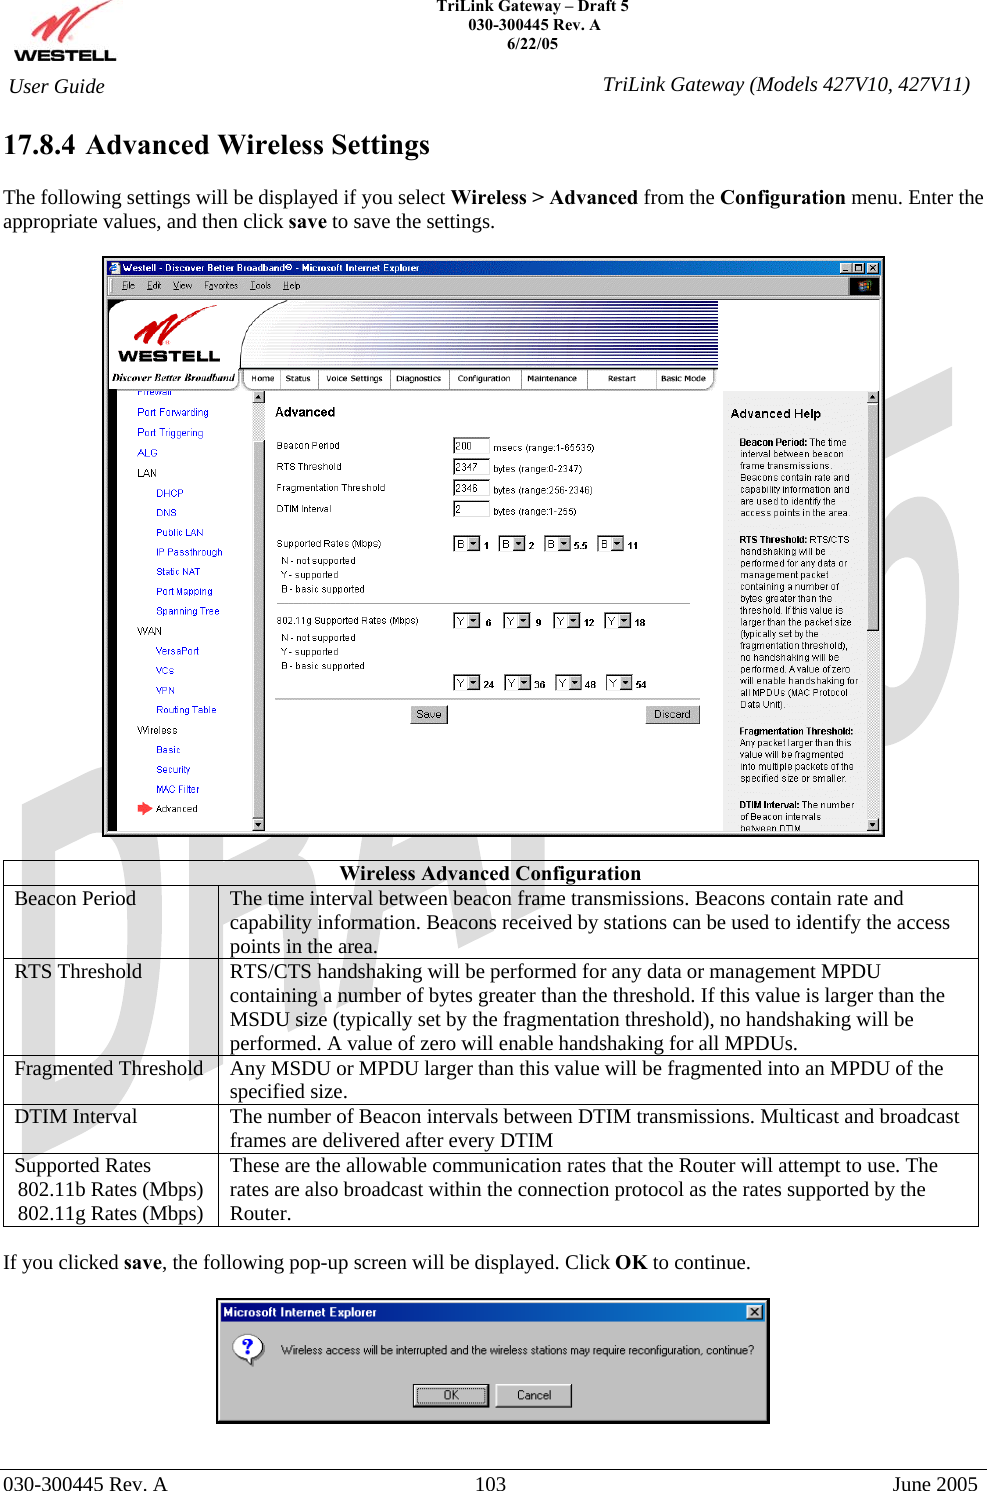    TriLink Gateway – Draft 5   030-300445 Rev. A 6/22/05   030-300445 Rev. A  103  June 2005  User Guide  TriLink Gateway (Models 427V10, 427V11)17.8.4  Advanced Wireless Settings  The following settings will be displayed if you select Wireless &gt; Advanced from the Configuration menu. Enter the appropriate values, and then click save to save the settings.    Wireless Advanced Configuration Beacon Period  The time interval between beacon frame transmissions. Beacons contain rate and capability information. Beacons received by stations can be used to identify the access points in the area. RTS Threshold  RTS/CTS handshaking will be performed for any data or management MPDU containing a number of bytes greater than the threshold. If this value is larger than the MSDU size (typically set by the fragmentation threshold), no handshaking will be performed. A value of zero will enable handshaking for all MPDUs. Fragmented Threshold  Any MSDU or MPDU larger than this value will be fragmented into an MPDU of the specified size. DTIM Interval  The number of Beacon intervals between DTIM transmissions. Multicast and broadcast frames are delivered after every DTIM Supported Rates 802.11b Rates (Mbps) 802.11g Rates (Mbps) These are the allowable communication rates that the Router will attempt to use. The rates are also broadcast within the connection protocol as the rates supported by the Router.   If you clicked save, the following pop-up screen will be displayed. Click OK to continue.    